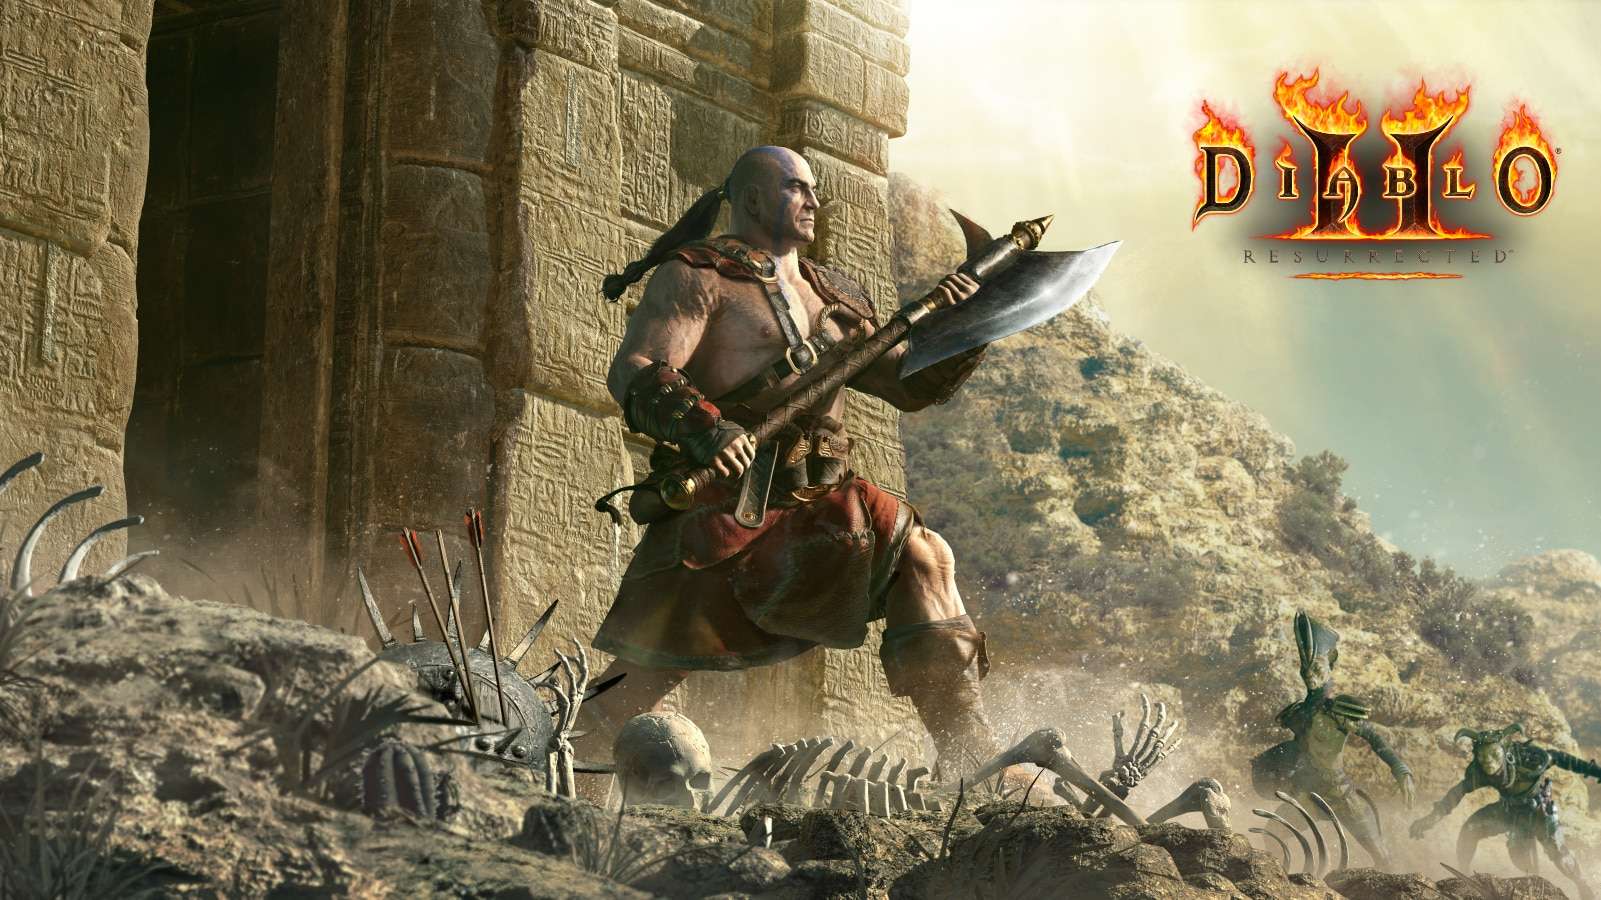 Diablo 2 Resurrected Barbarian with ax looks out over desert